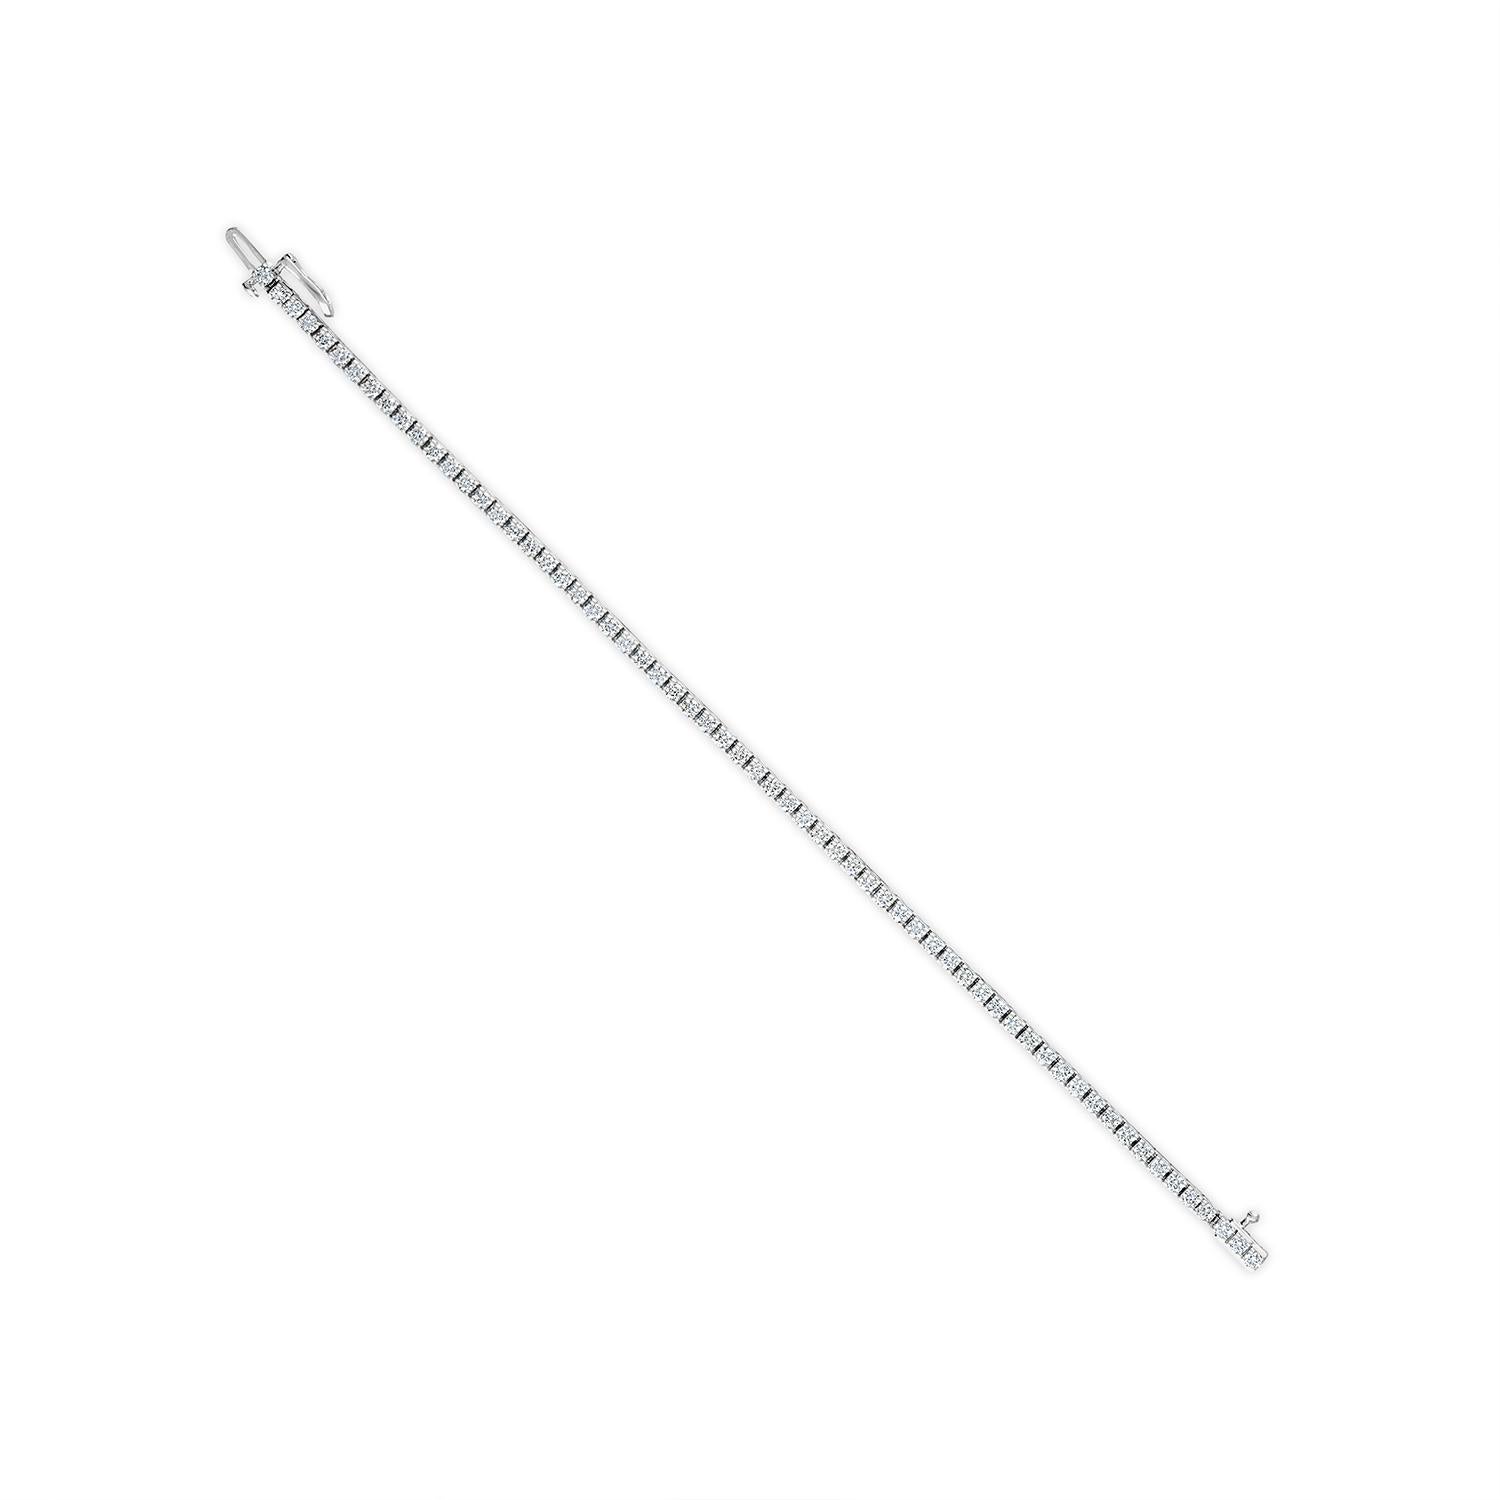 Metal: 14kt White Gold  
Diamond Shape: Round Brilliant
Total Diamond Weight: 3.00 CTW
Number of Diamonds: 63
Length: 7.5 inches
Clarity: Very Slightly Included ( VS2 )
Color: Near Colorless ( I )
Clasp:  Hidden Clasp with Safety Catch